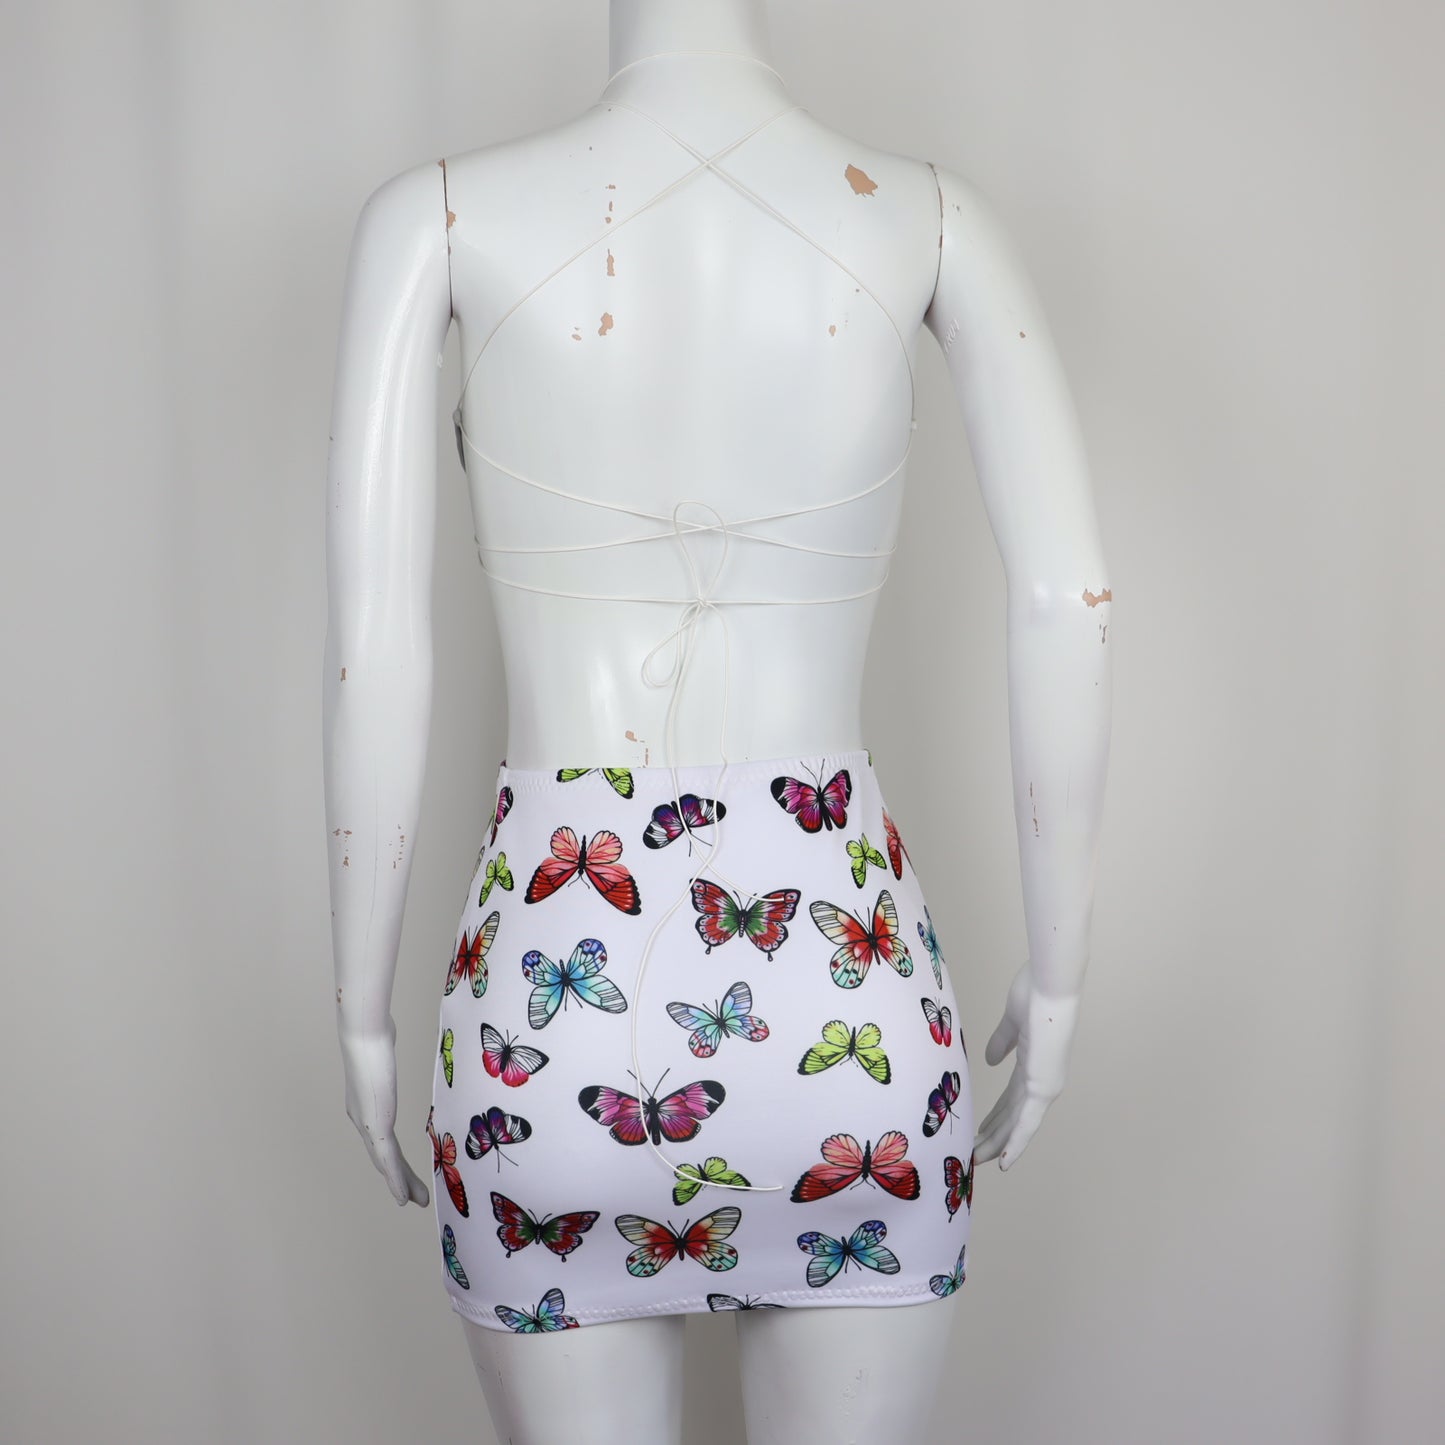 BUTTERFLY PRINT -  Butterfly top &  Fitted skirt.